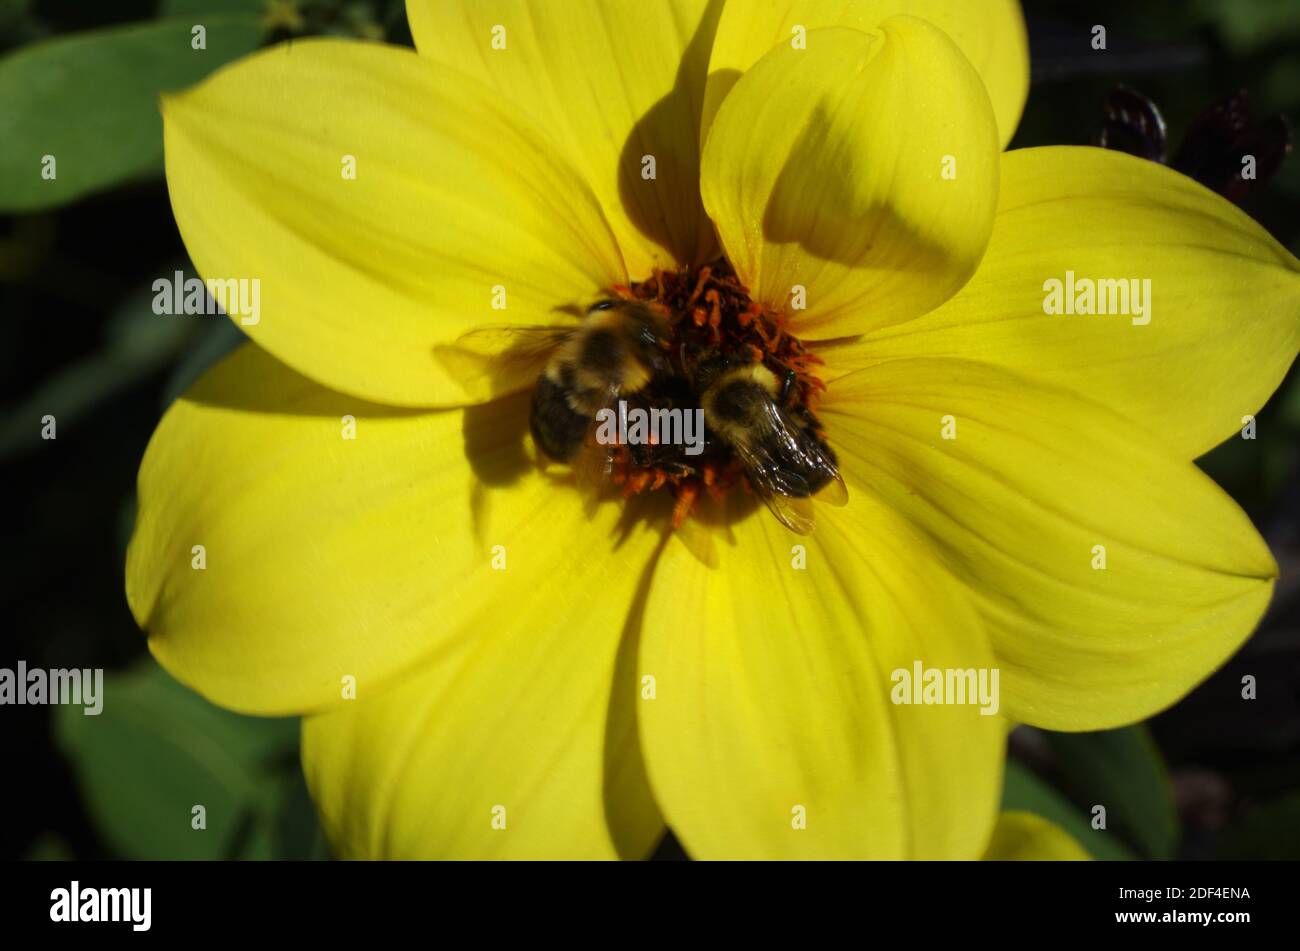 Two bees on Single Flowered Dahlia Stock Photo